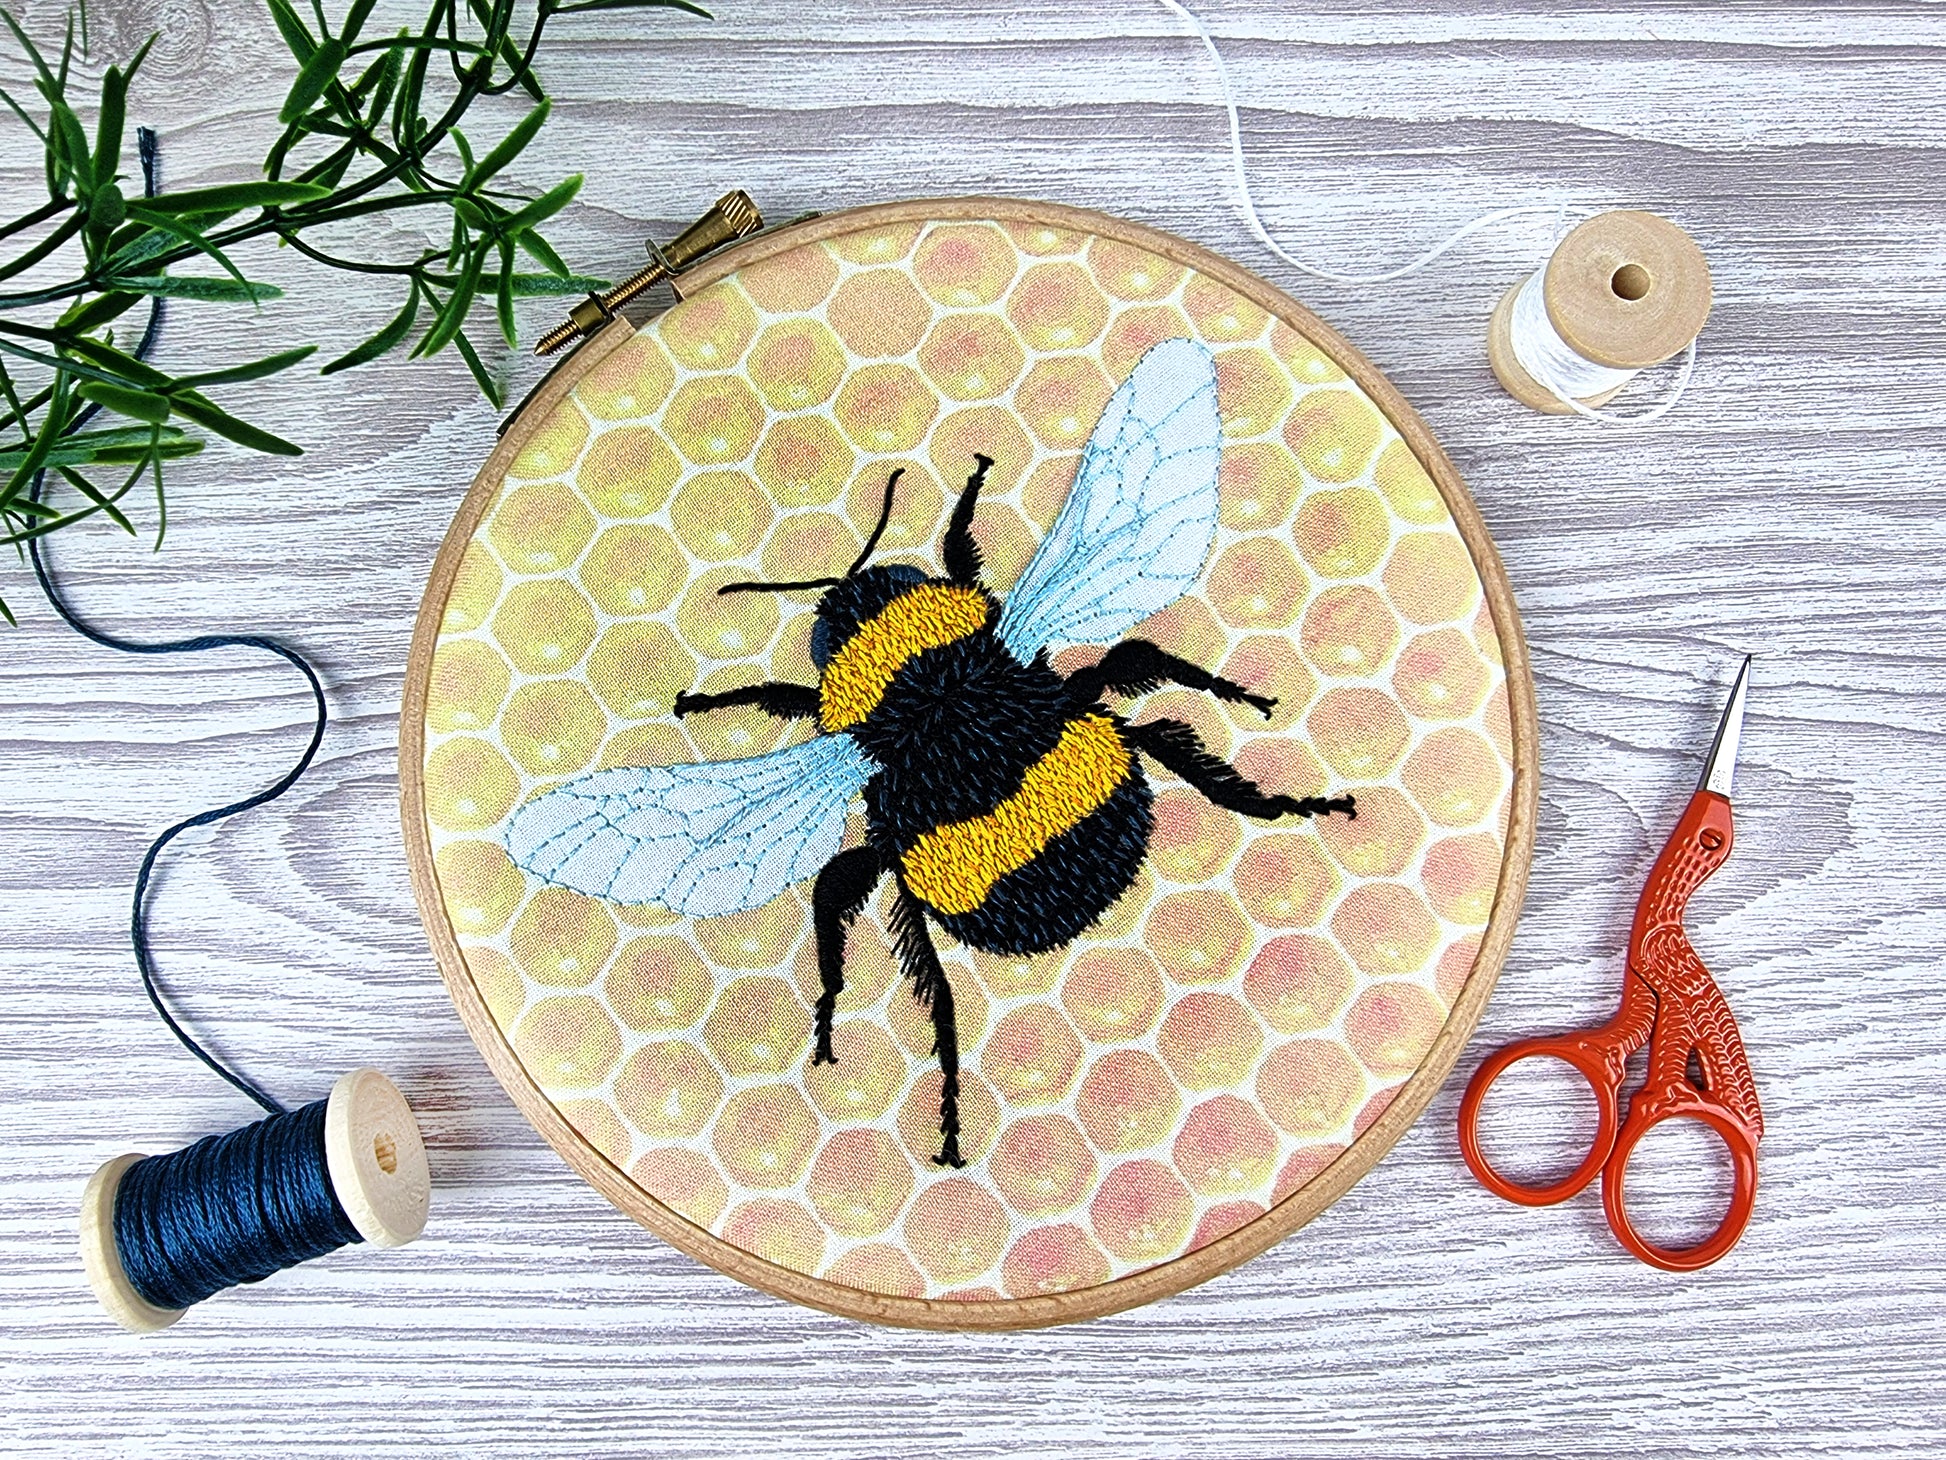 Thread Painted Bumble Bee Embroidery Kit - Embroidery Kits - ohsewbootiful